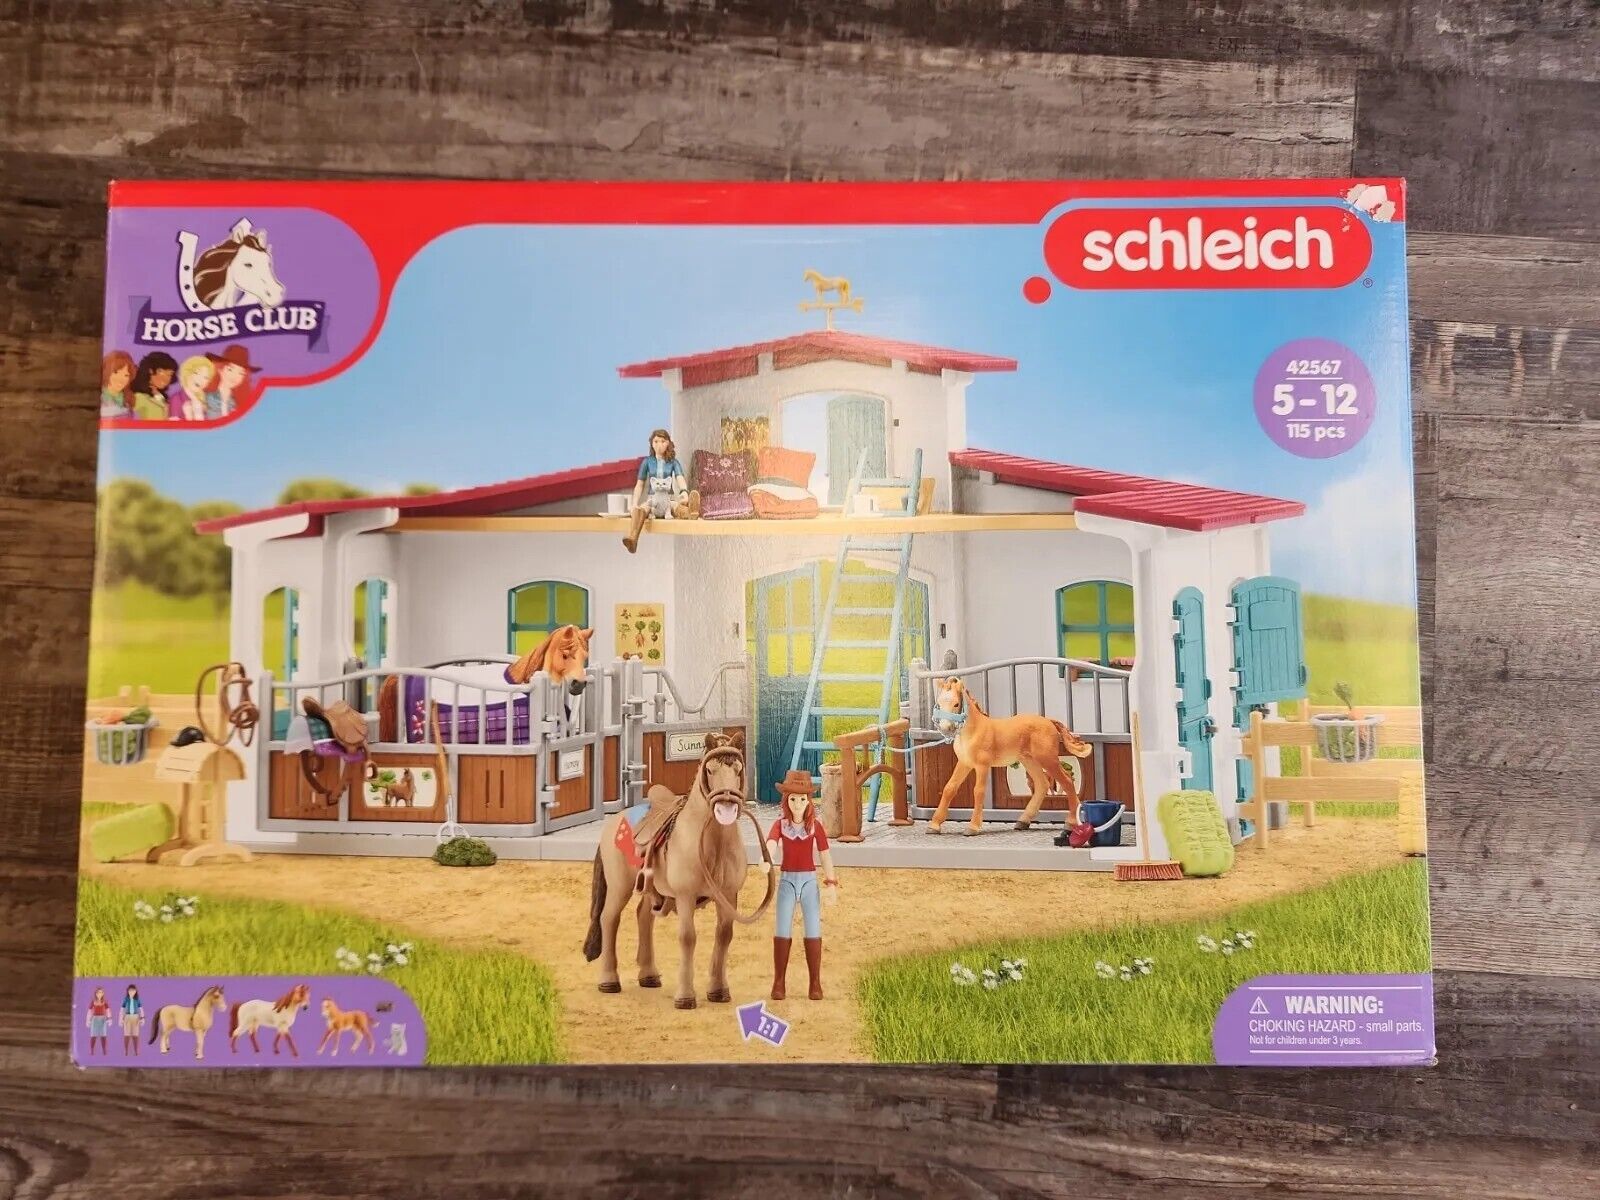 Schleich Horse Toys and Playsets, 41 Piece Set Lakeside Country Riding New